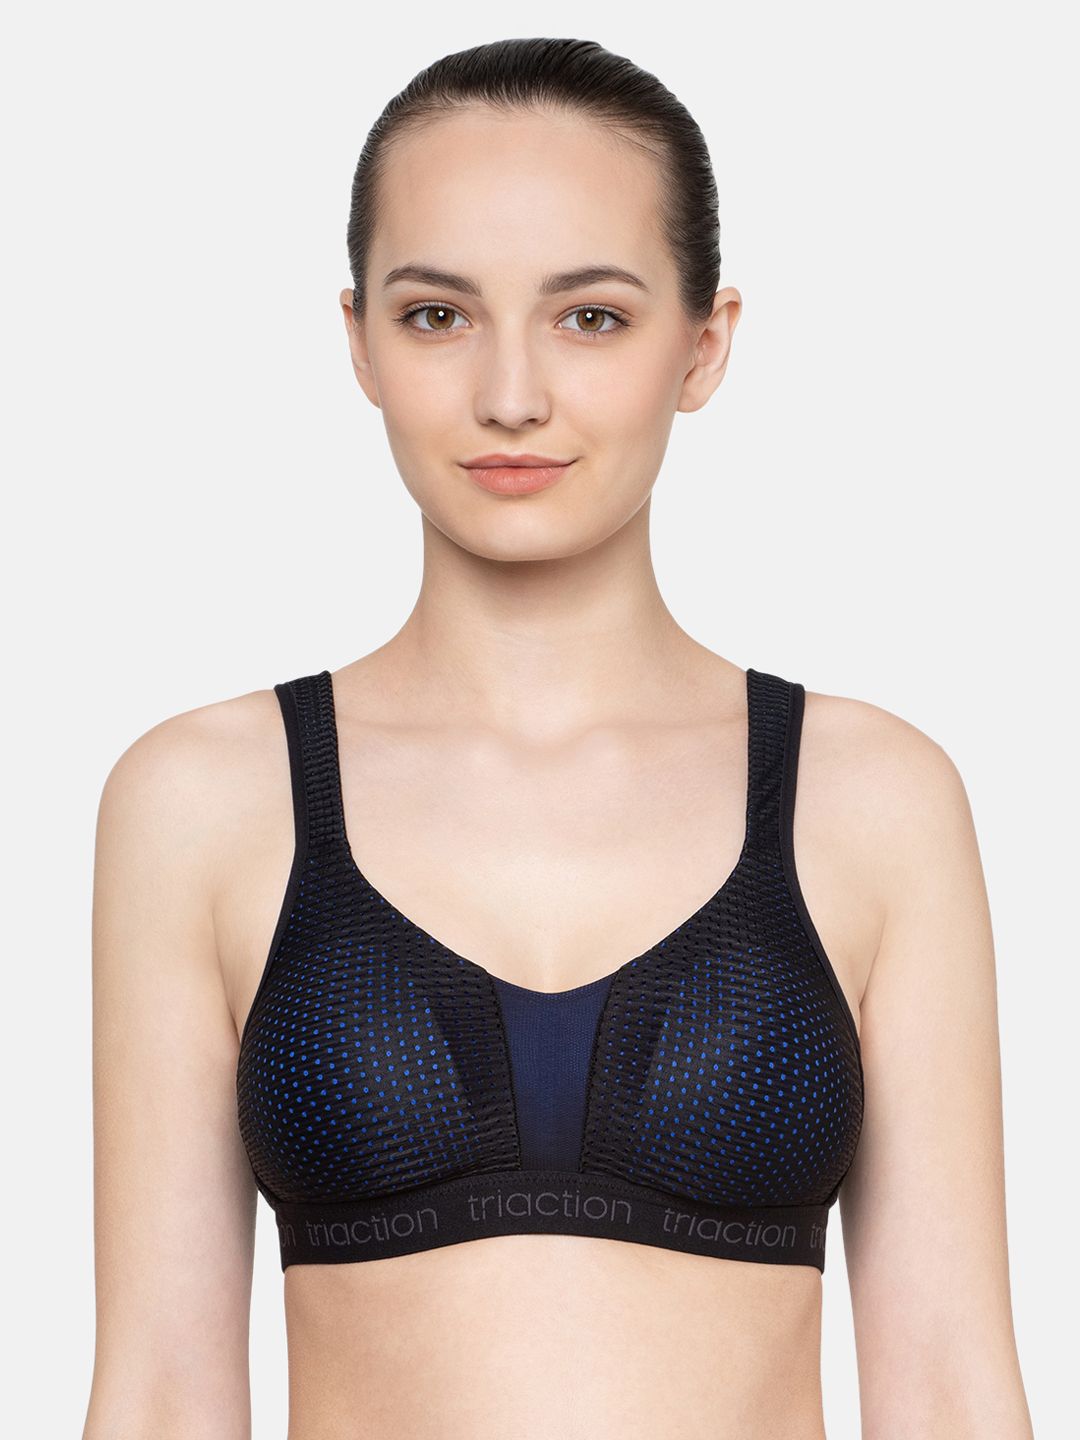 Triumph Triaction Energy Lite Triaction Padded Wireless Extreme Bounce Control Sports Bra Price in India